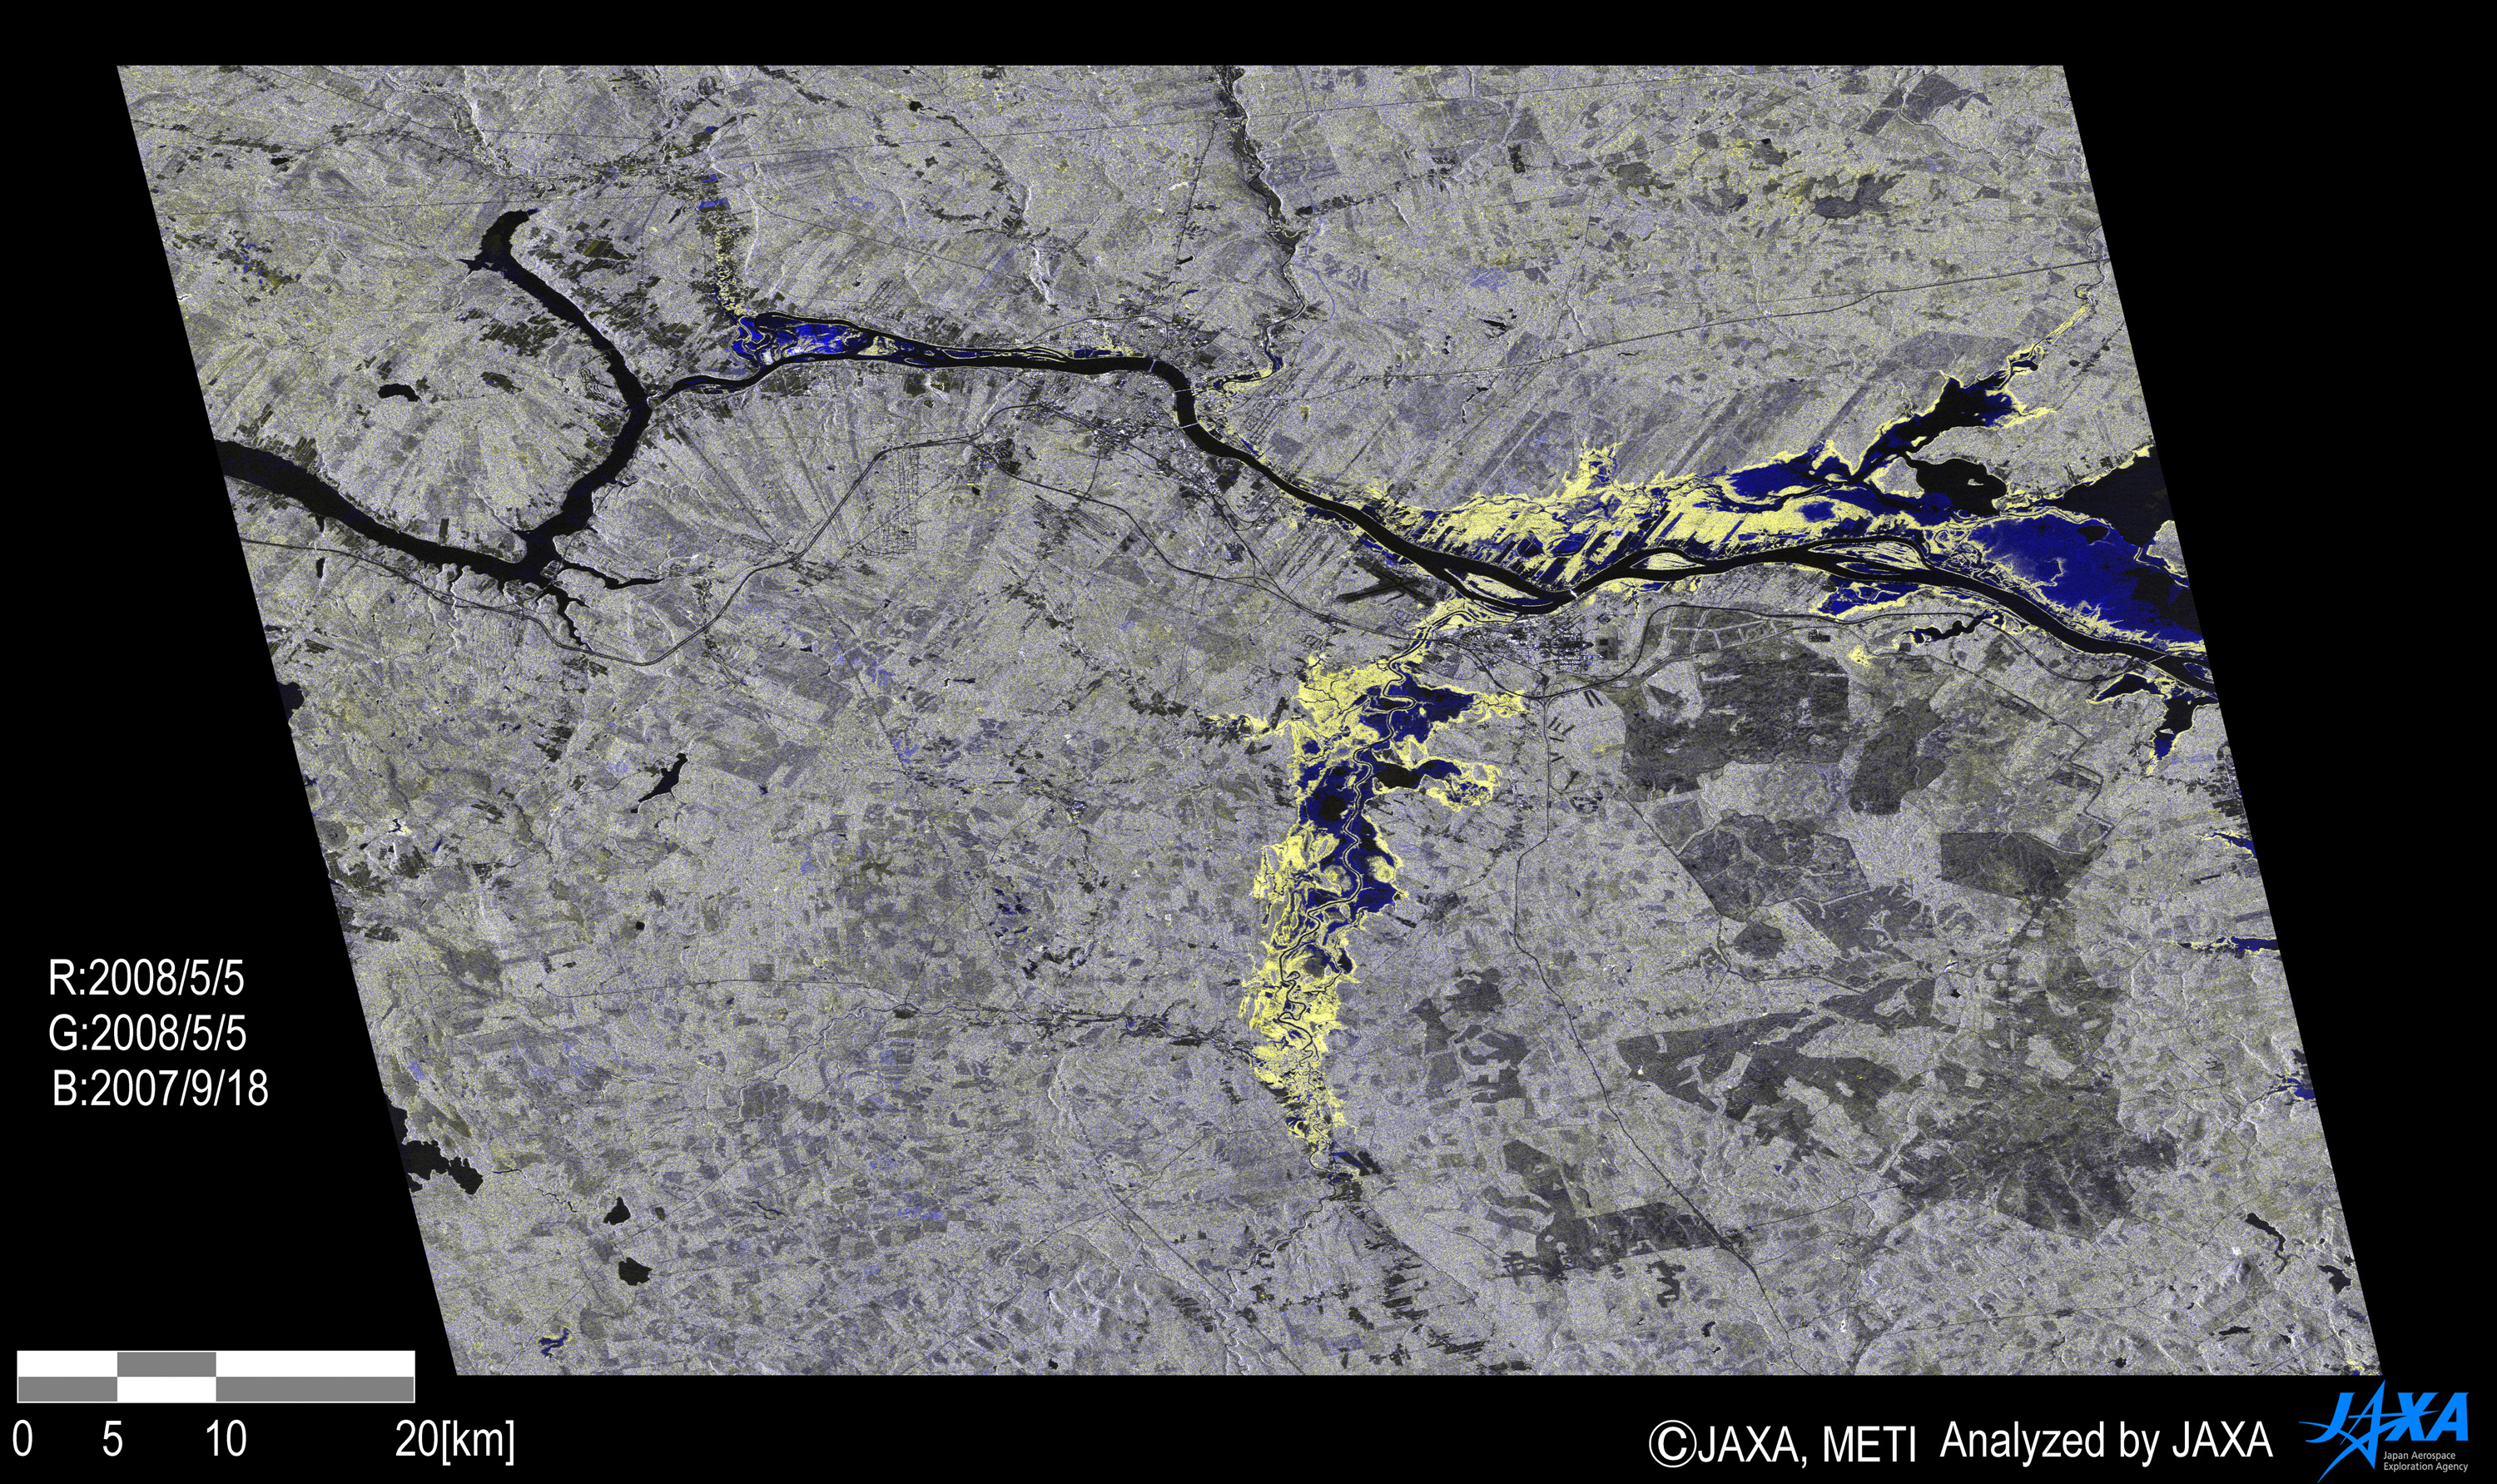 A color composite of these images, RED and GREEN for after the flood of May 5, 2008 and BLUE for the before of Sep. 18, 2007, shows the land surface change in the color. BLUE color in the figure shows the flooding in dominant and it spread out widely in the image.